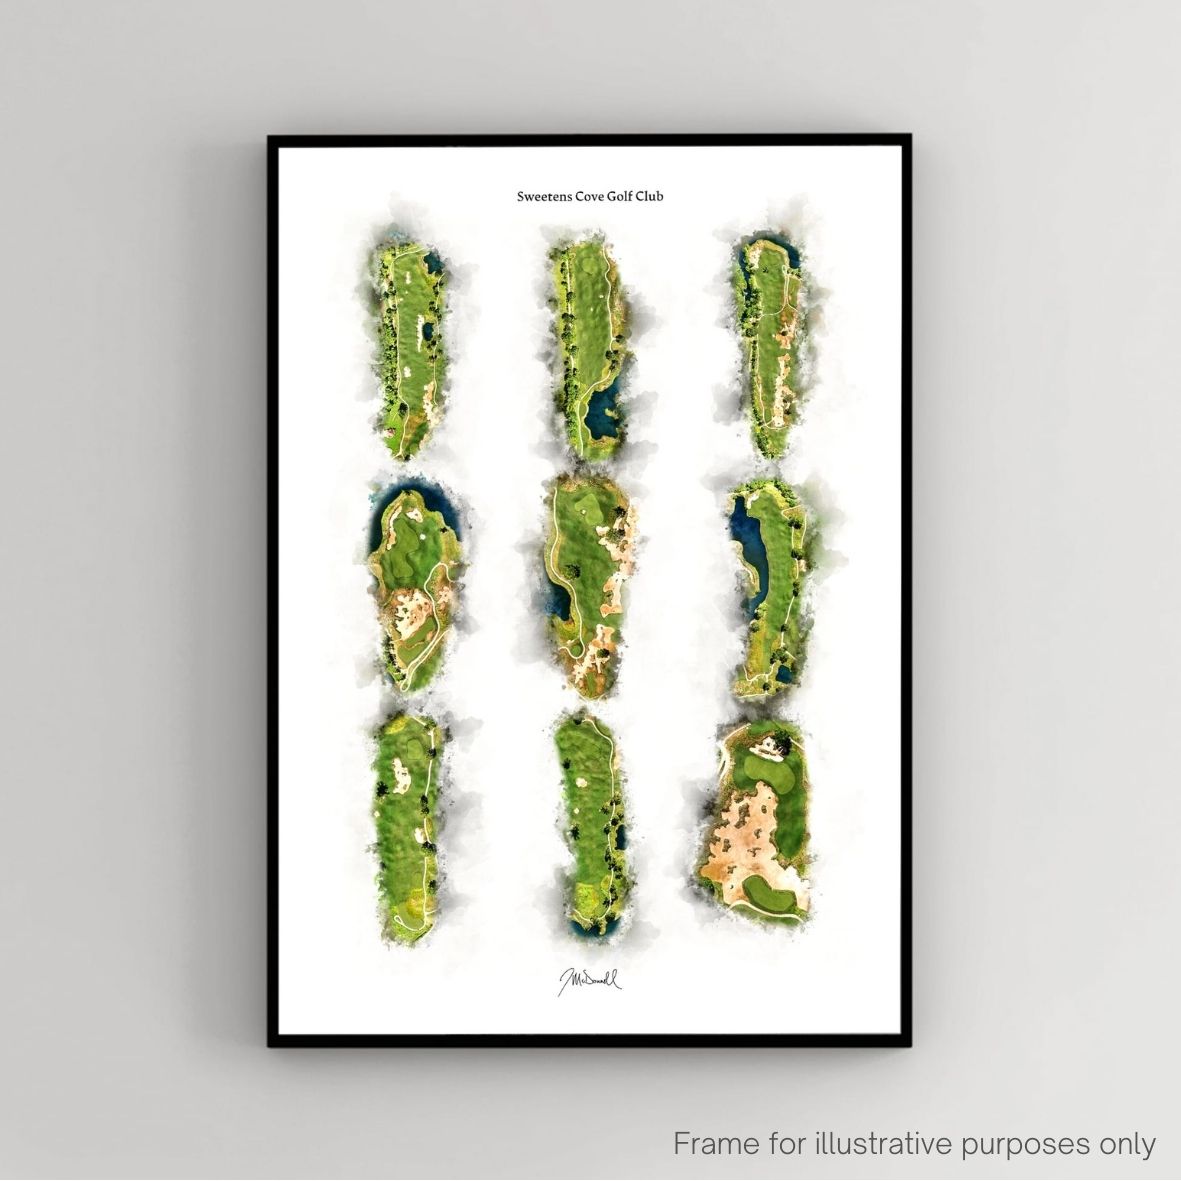 Sweetens Cove Golf Club 9 Hole Compilation Framed Print